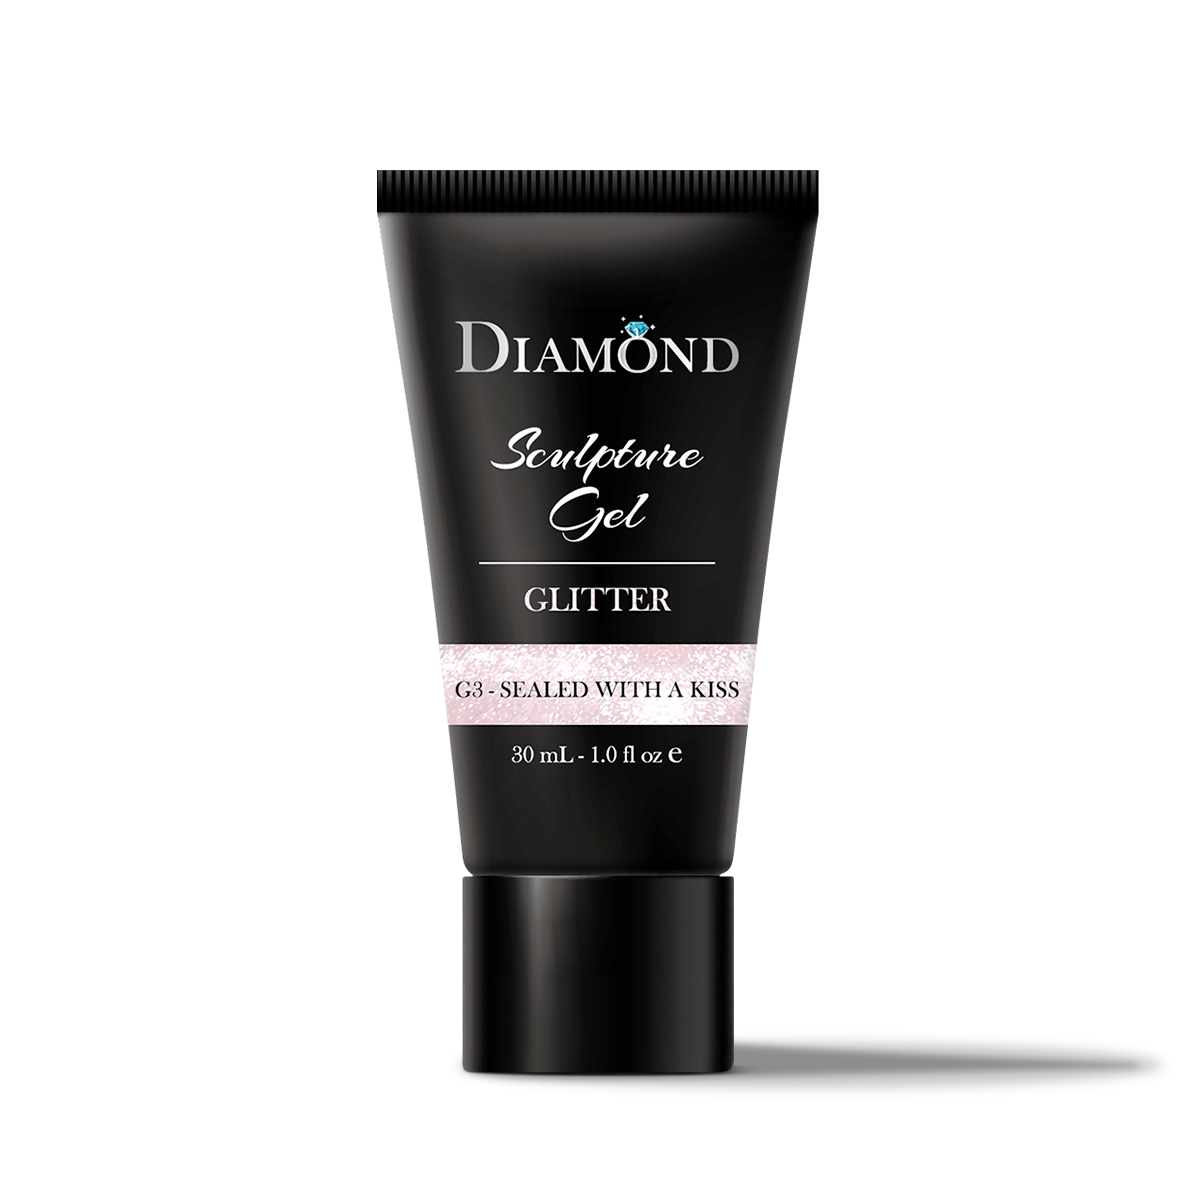 Diamond Sculpture Gel - G03 Sealed with a Kiss